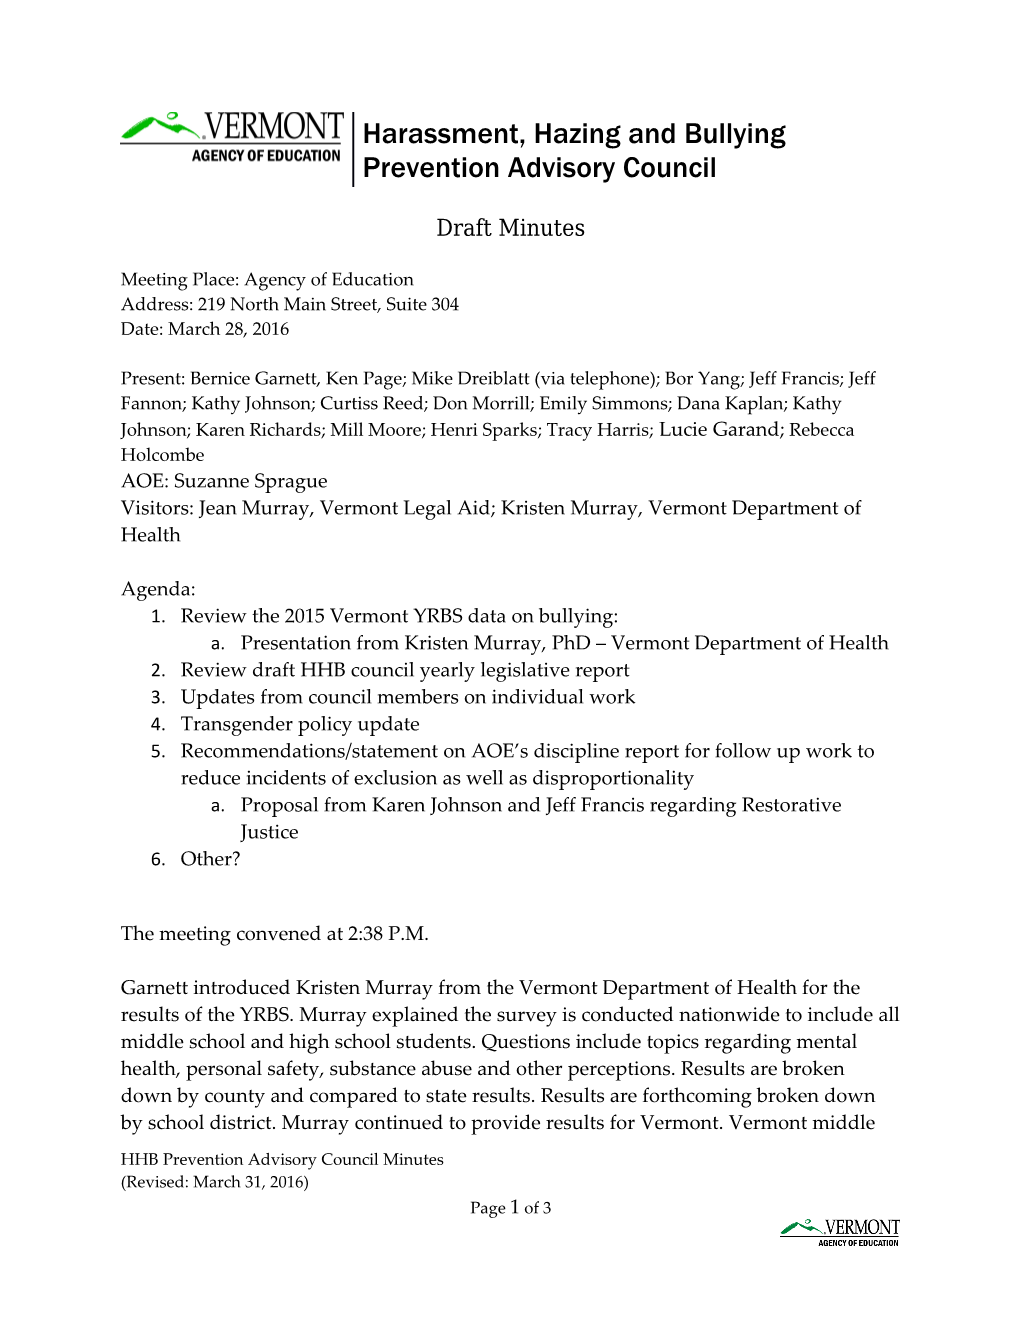 Harassment, Hazing and Bullying Prevention Advisory Council, Draft Minutes